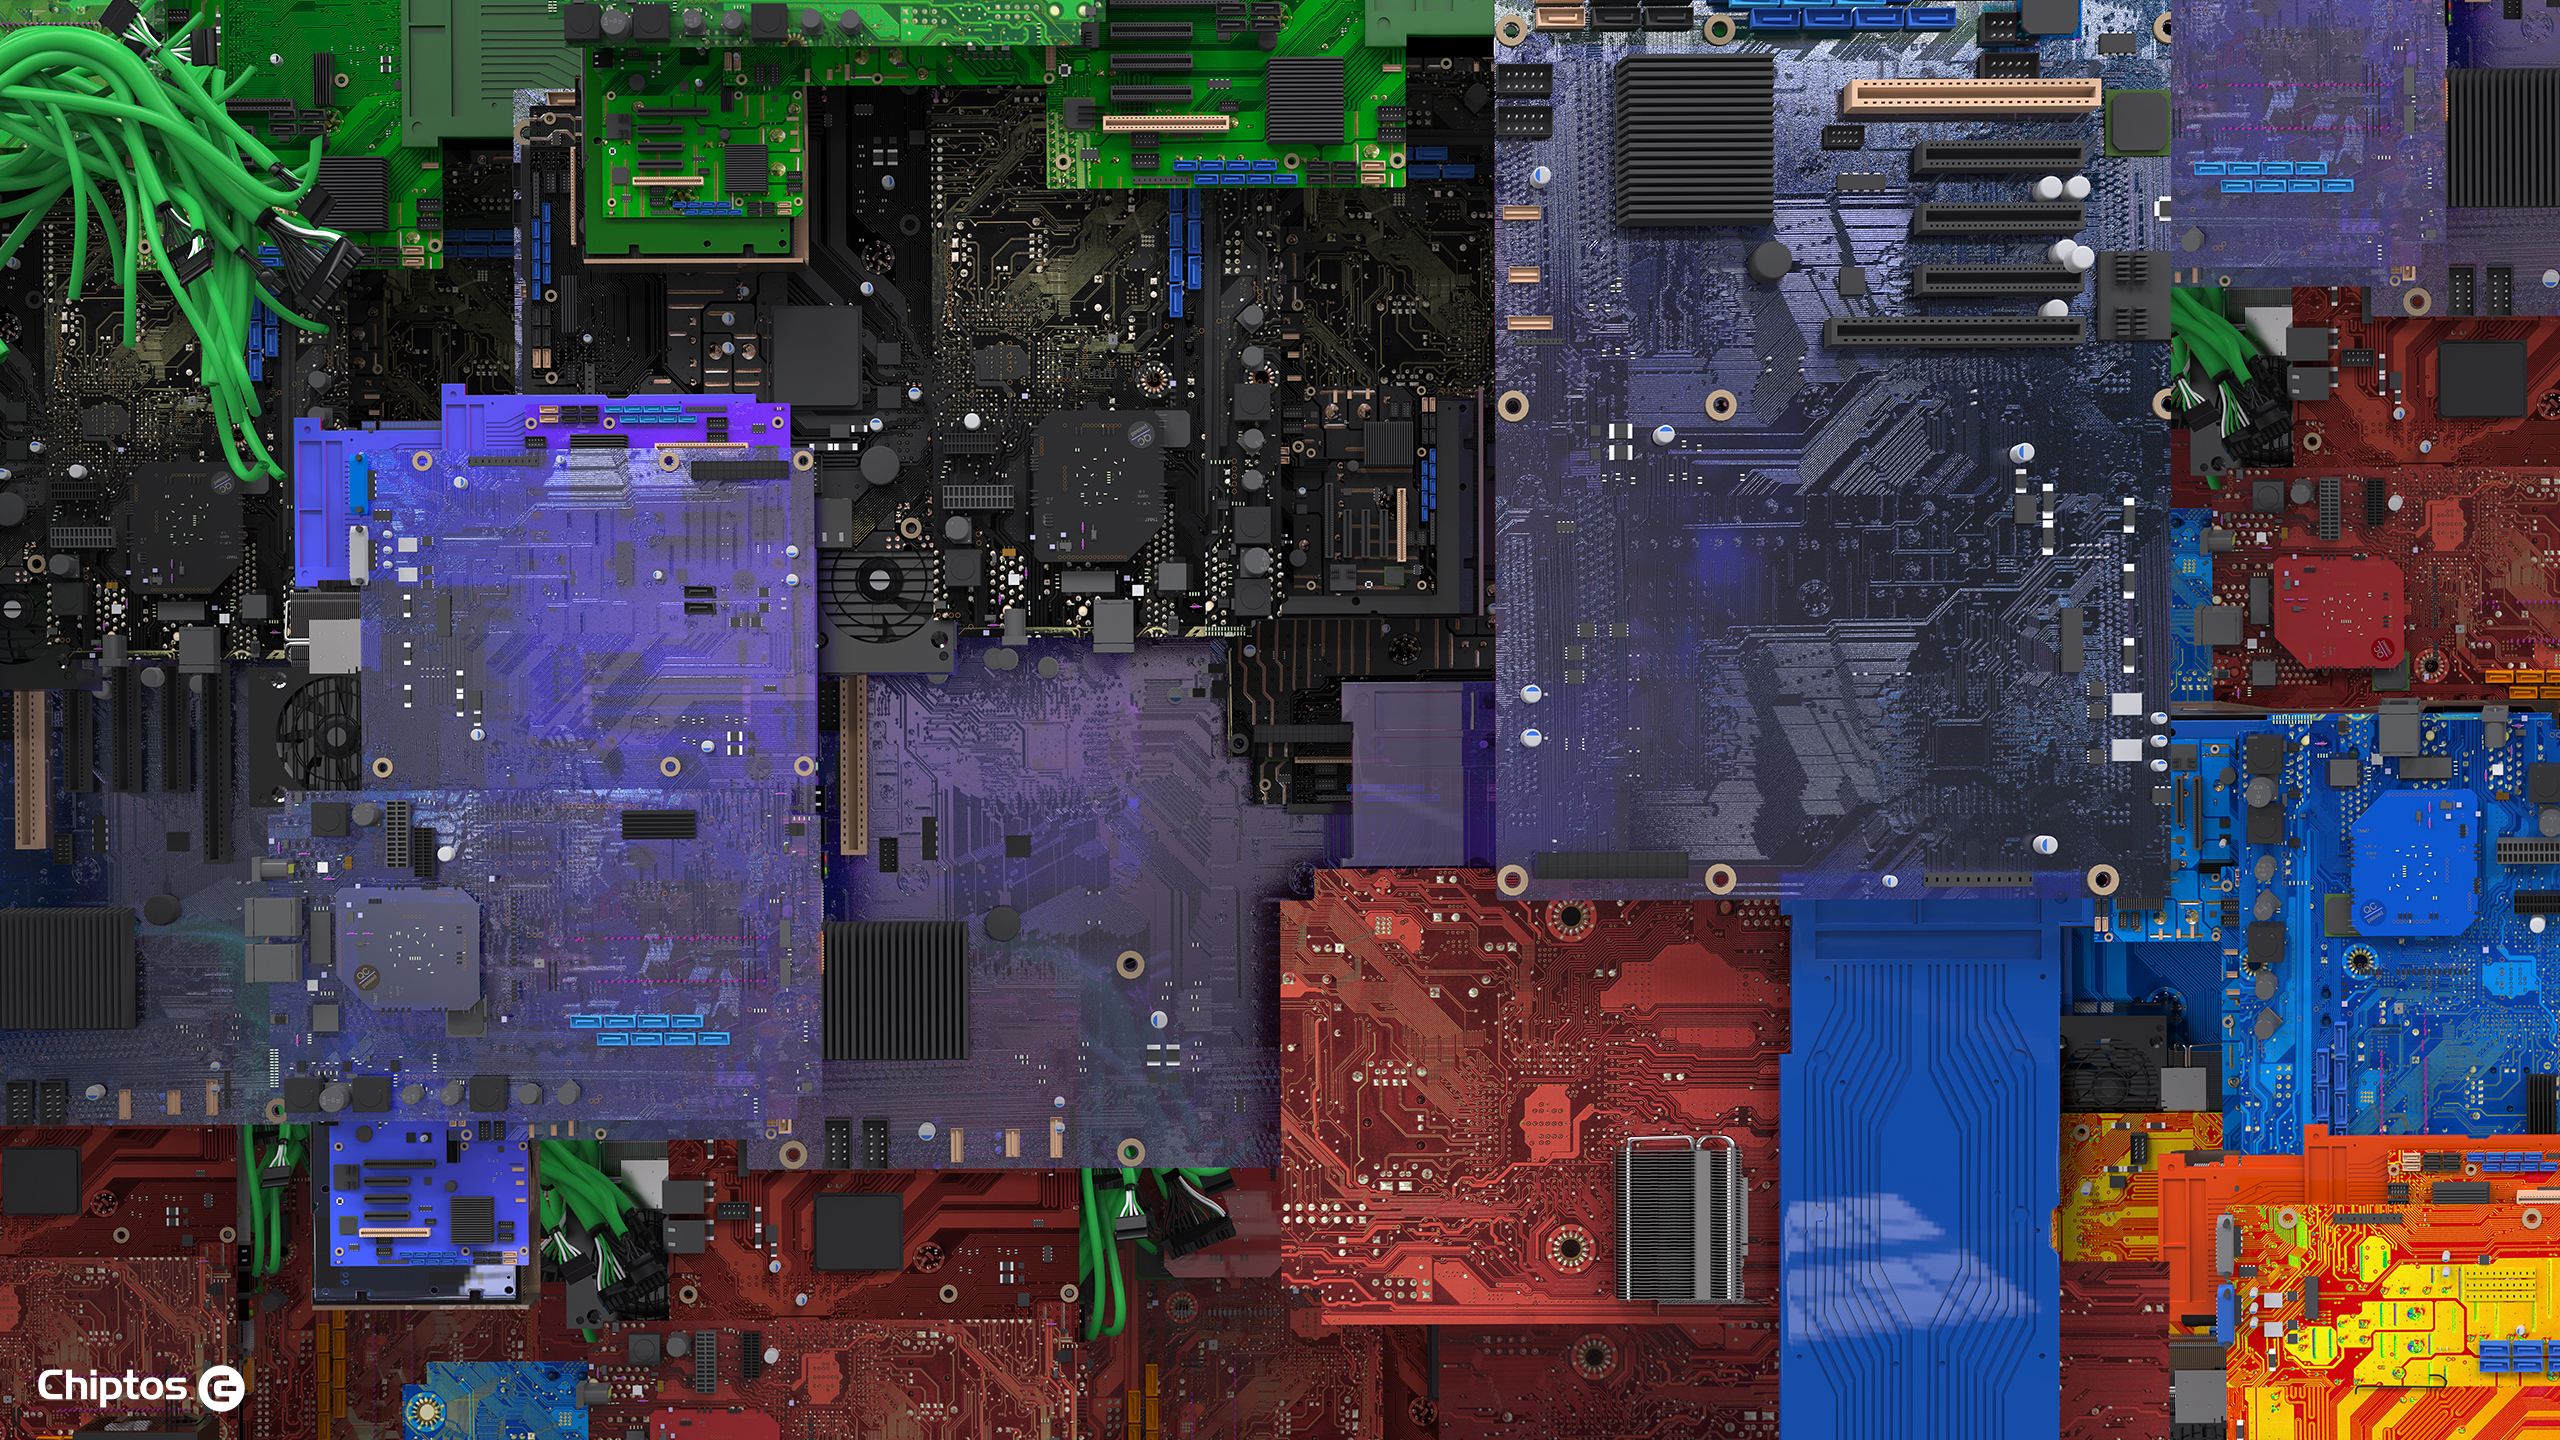 Chiptos Motherboards Computer PC Build Robot Circuit Boards Tech Digital Art Watermarked 2560x1440